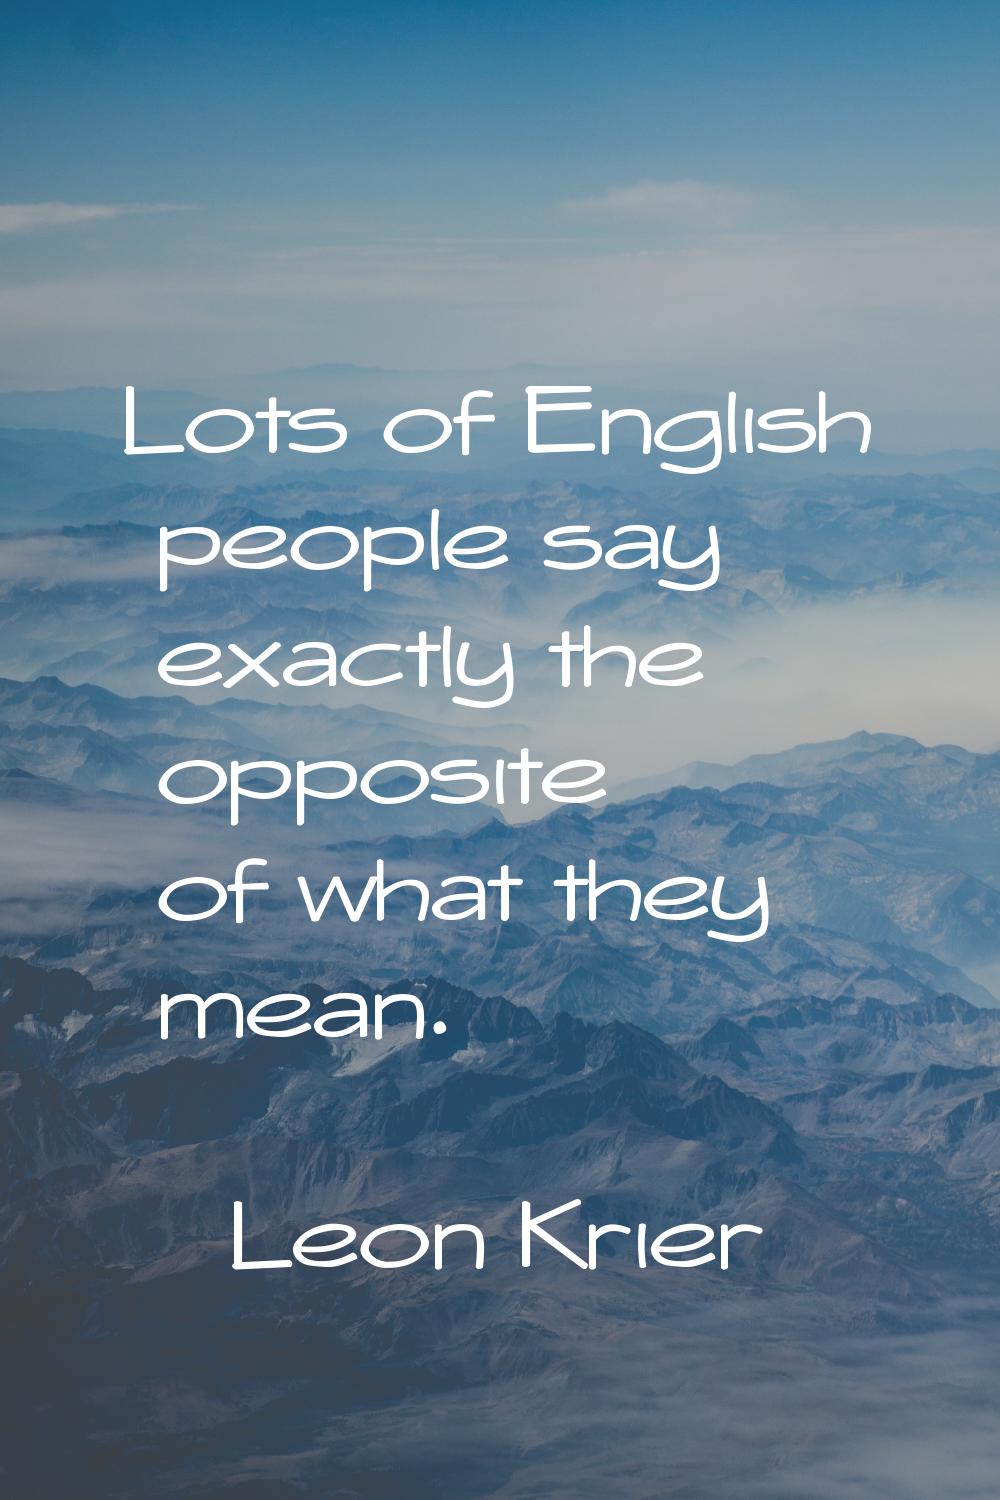 Lots of English people say exactly the opposite of what they mean.